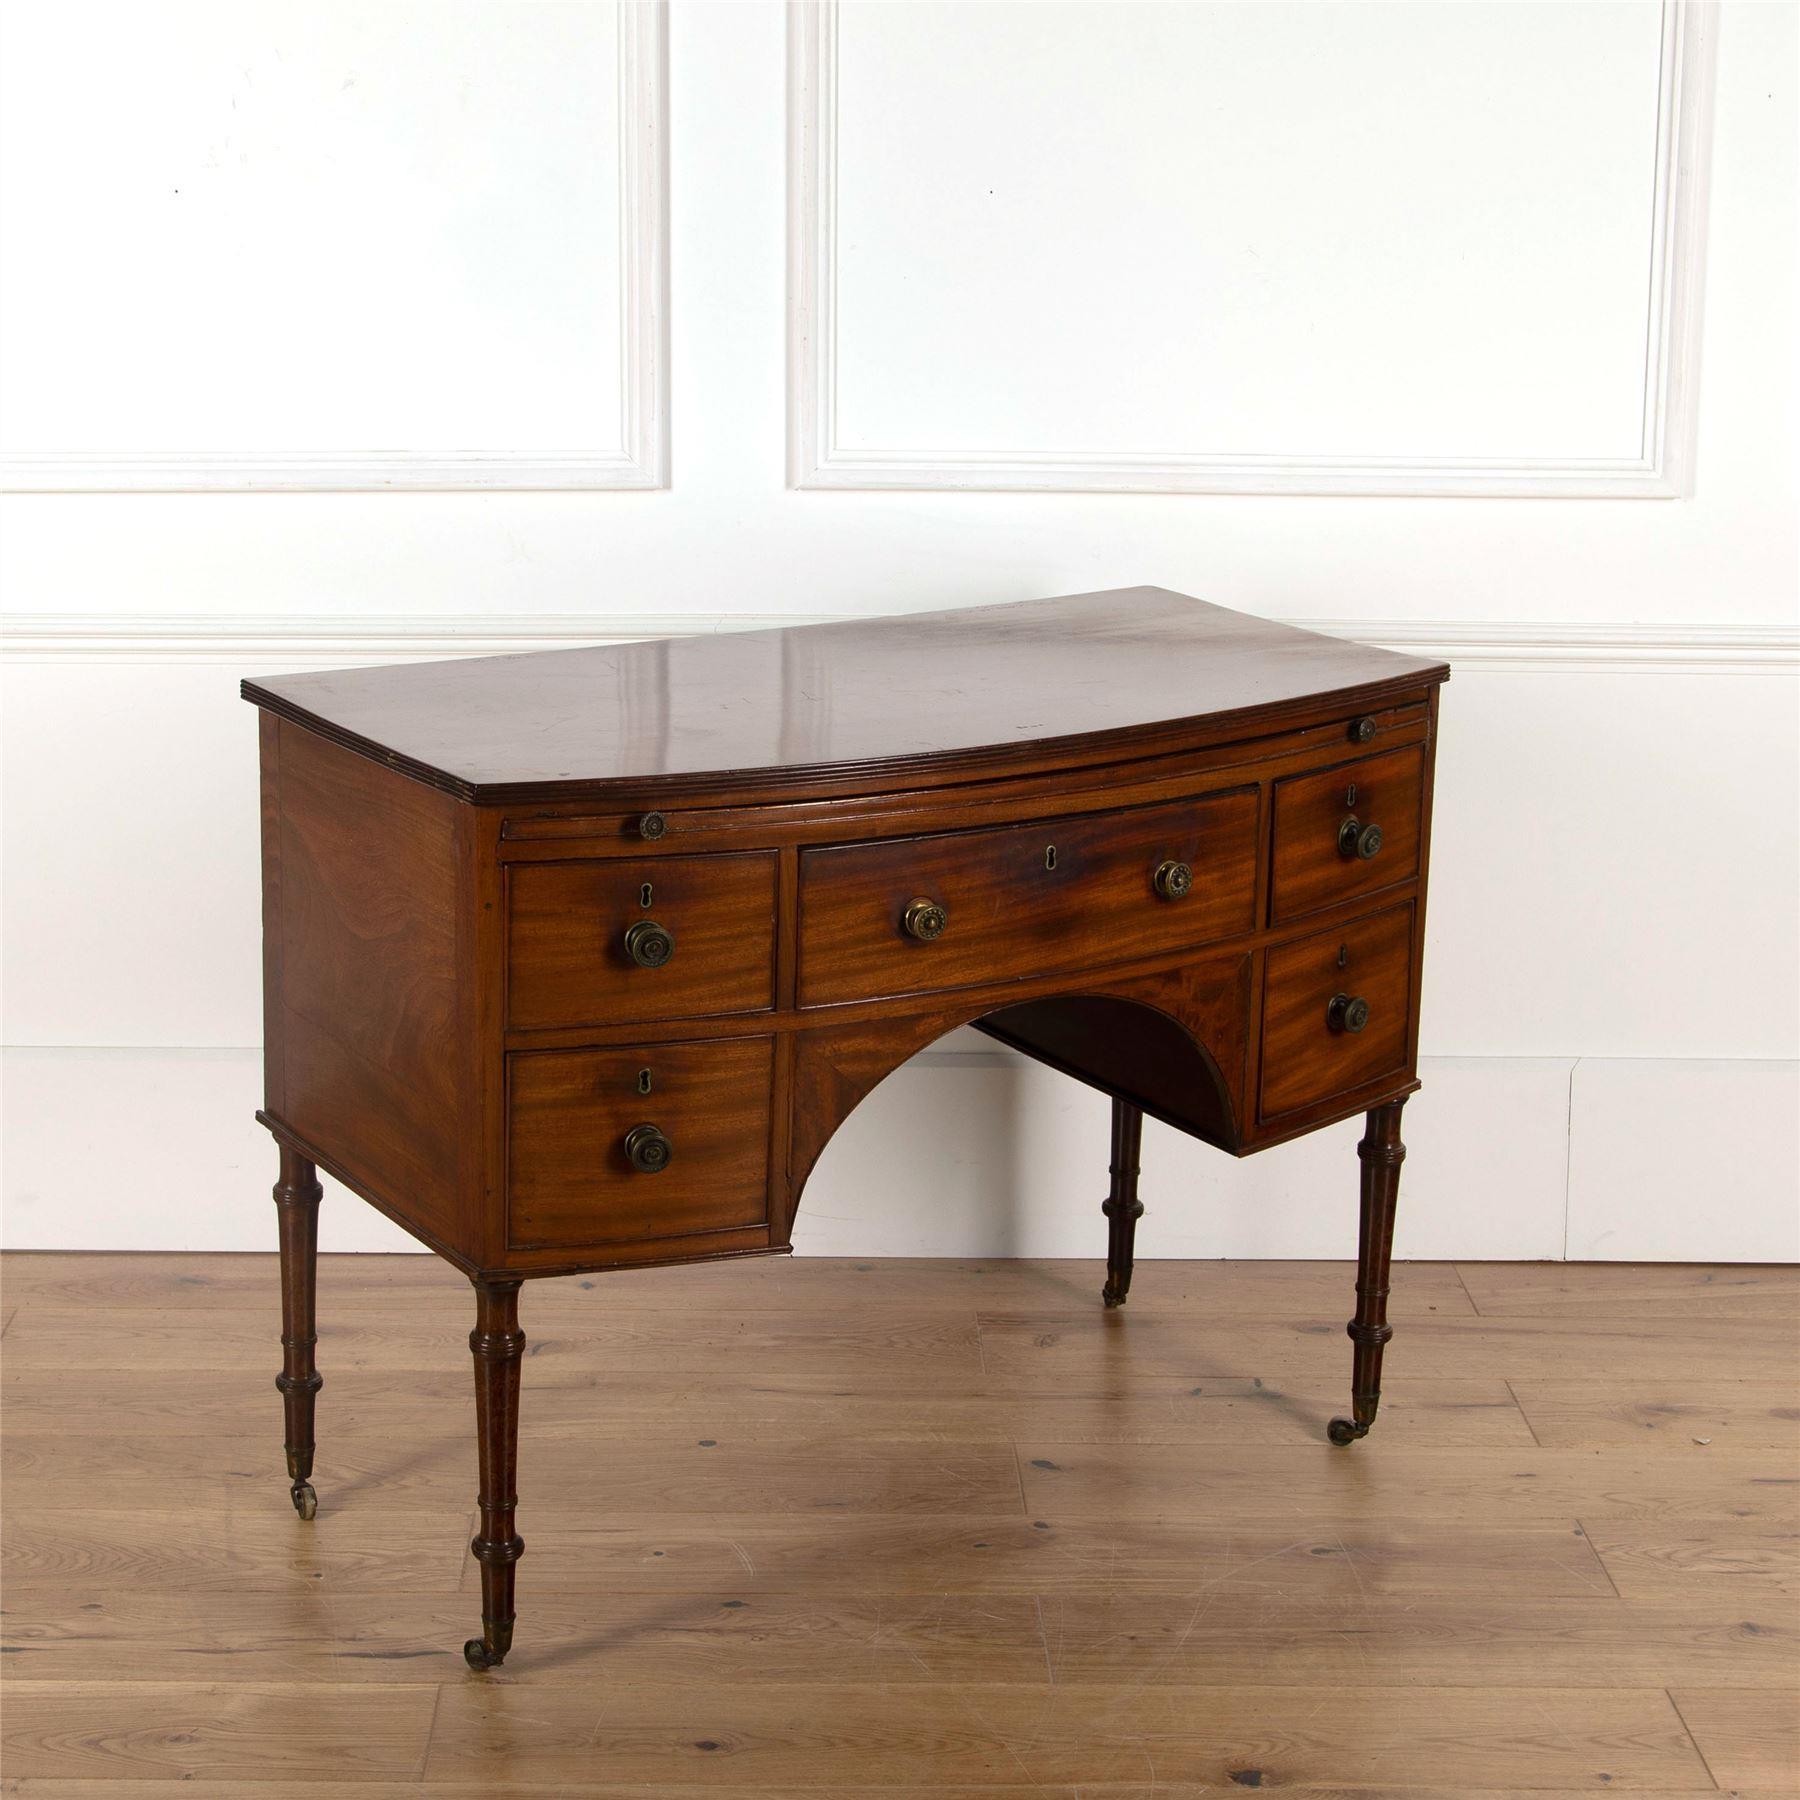 A 19th century side table in the manner of Gillows.